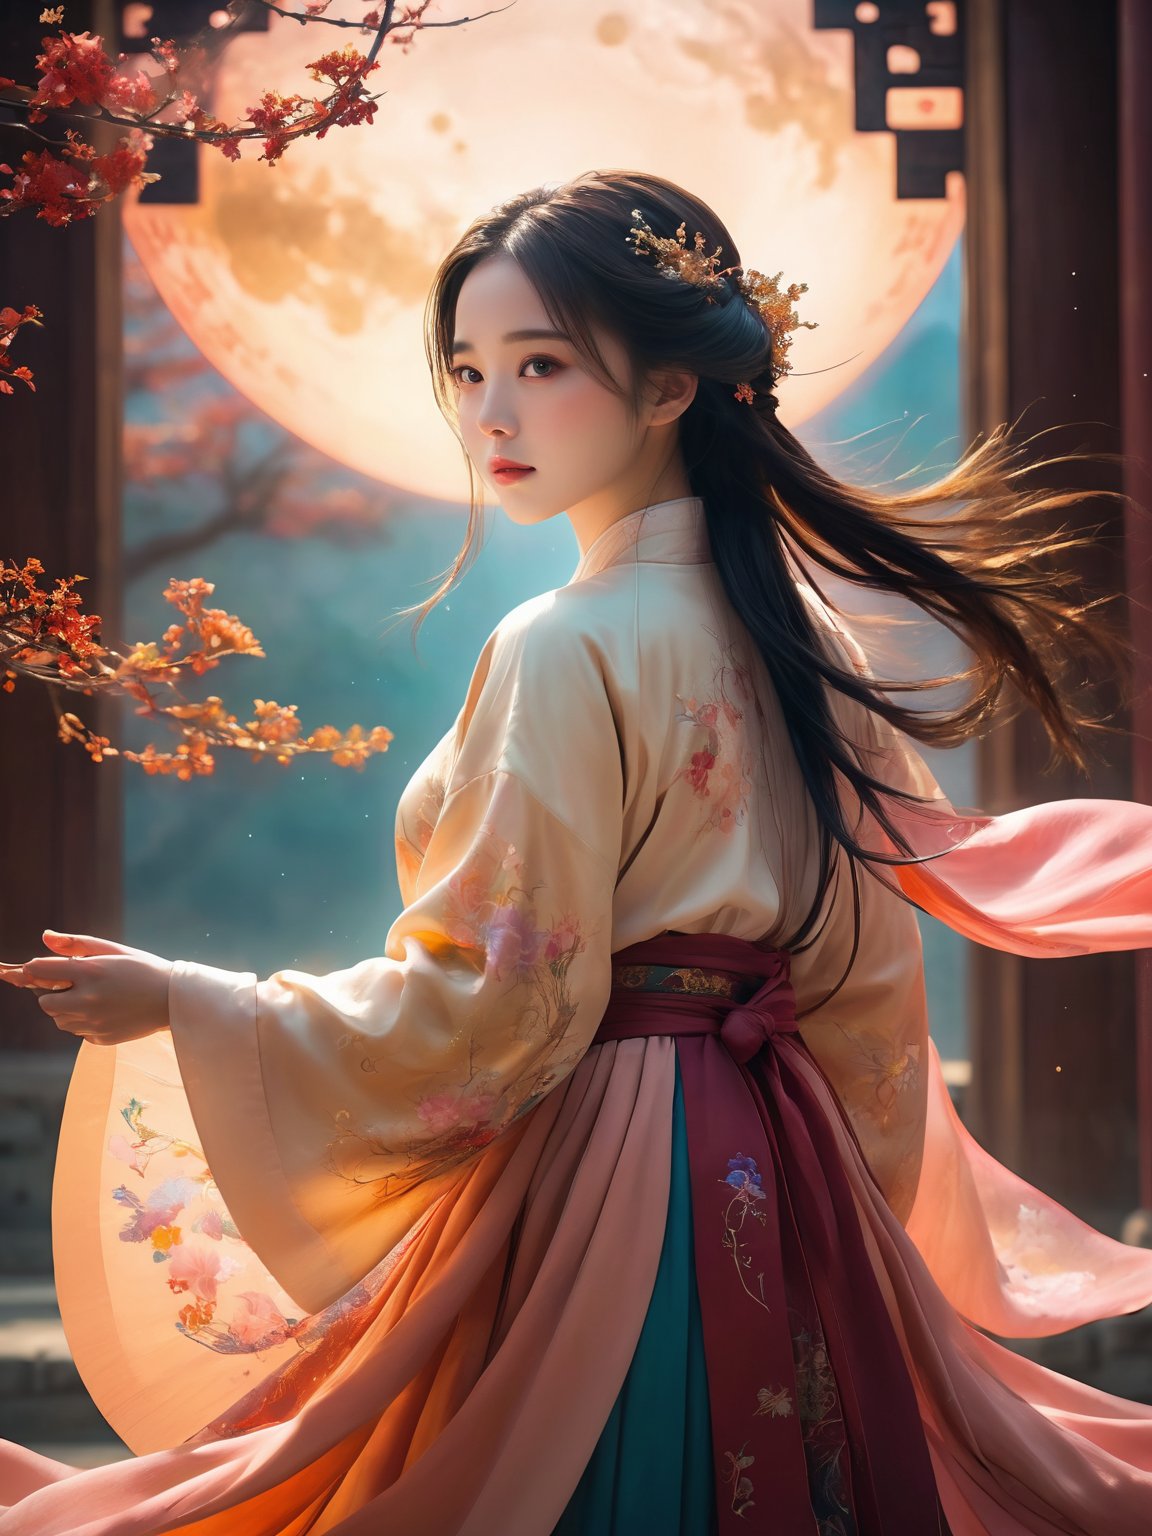 masterpiece, best quality, super wide angle, best fingers, facing viewer, full frontal, magnificent, celestial, ethereal, painterly, epic, majestic, magical, fantasy art, cover art, dreamy, elegant, cinematic, background illuminated, rich deep colors, ambient dramatic atmosphere, creative, perfect, beautiful composition, intricate, detailed1girl, hanfu,